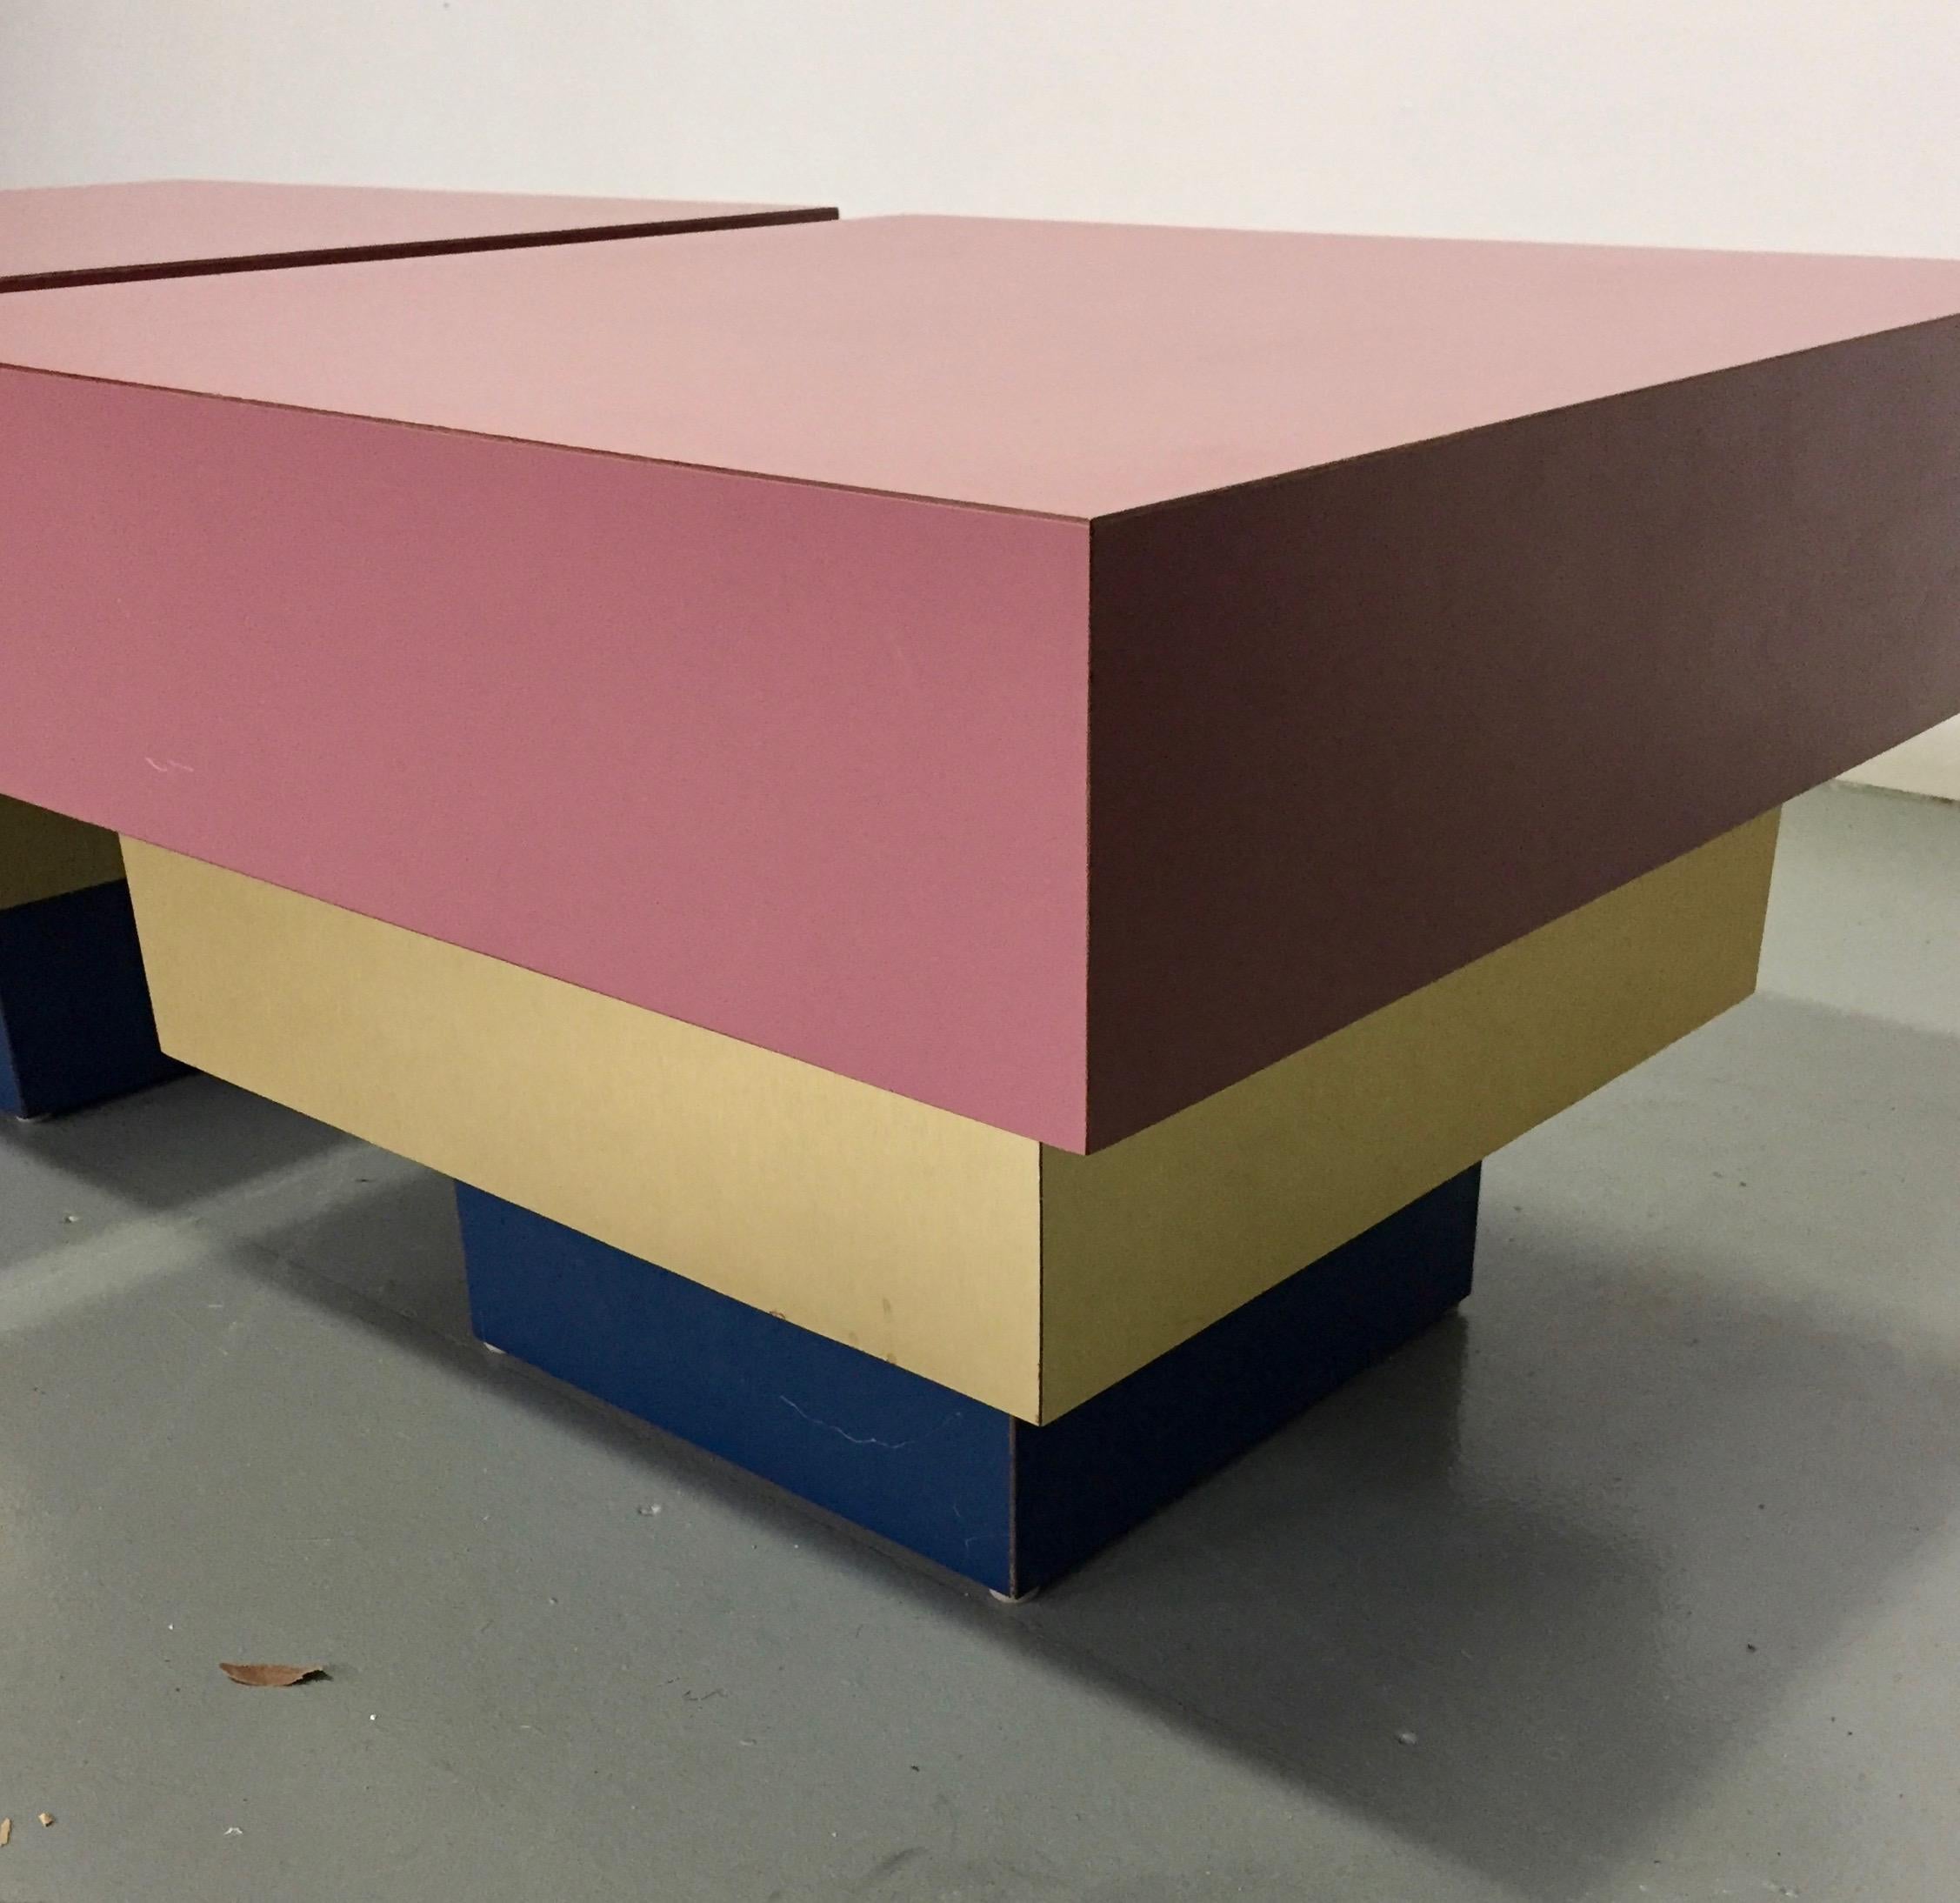 Formica Dusty Rose and Brass Stepped Side Tables Midcentury a La Karl Springer 2